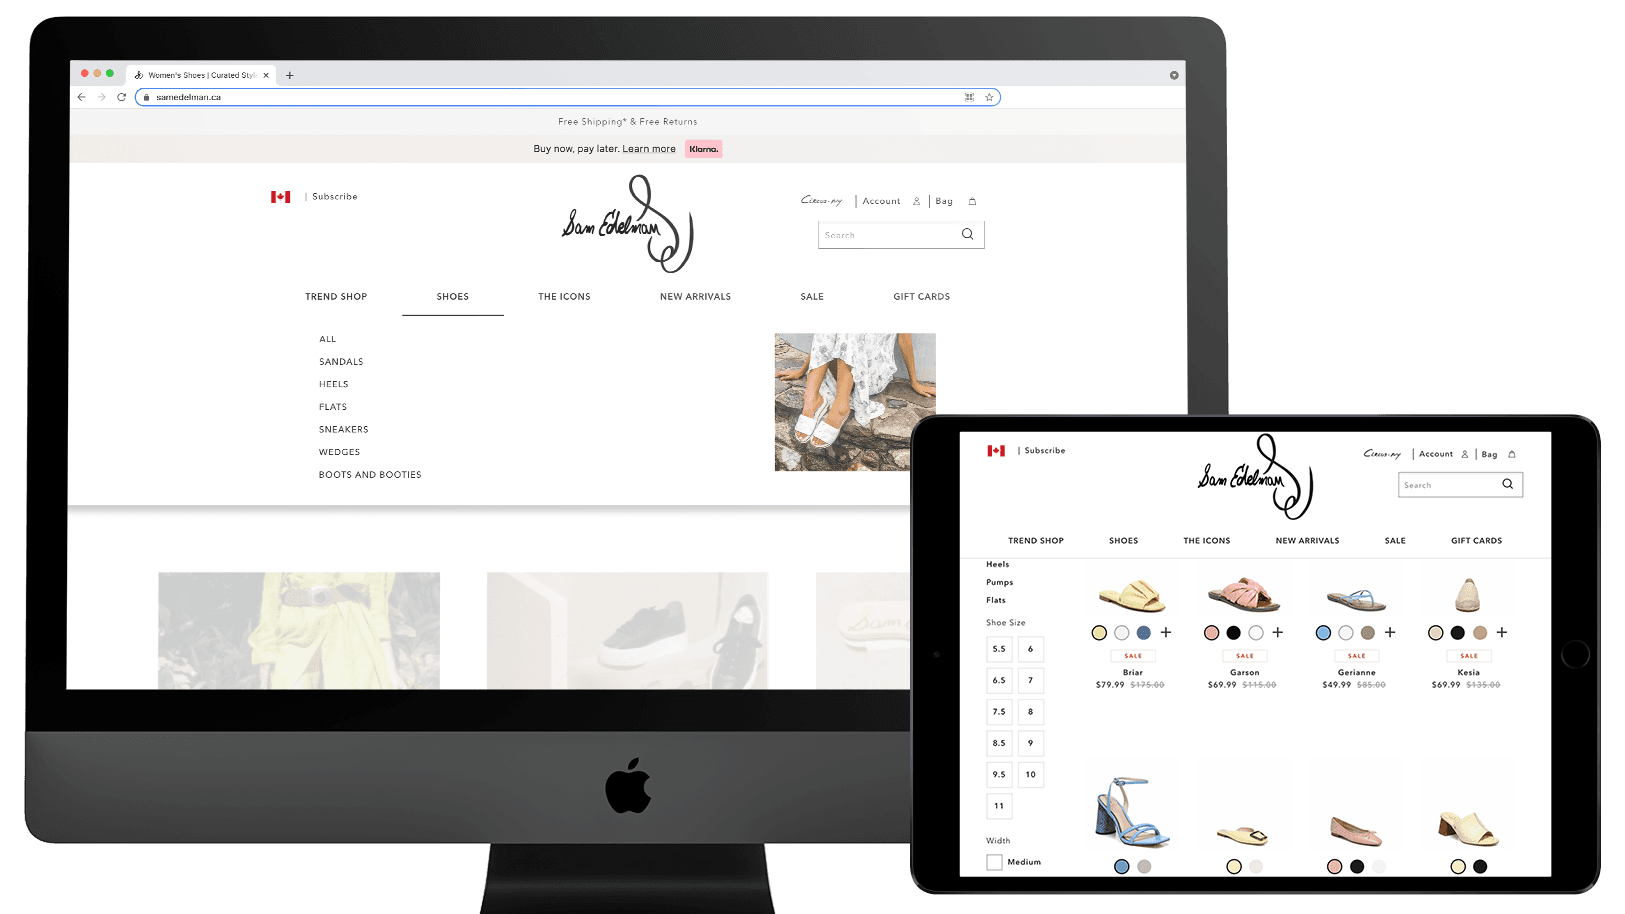 Screenshots of the Sam Edelman website on multiple devices